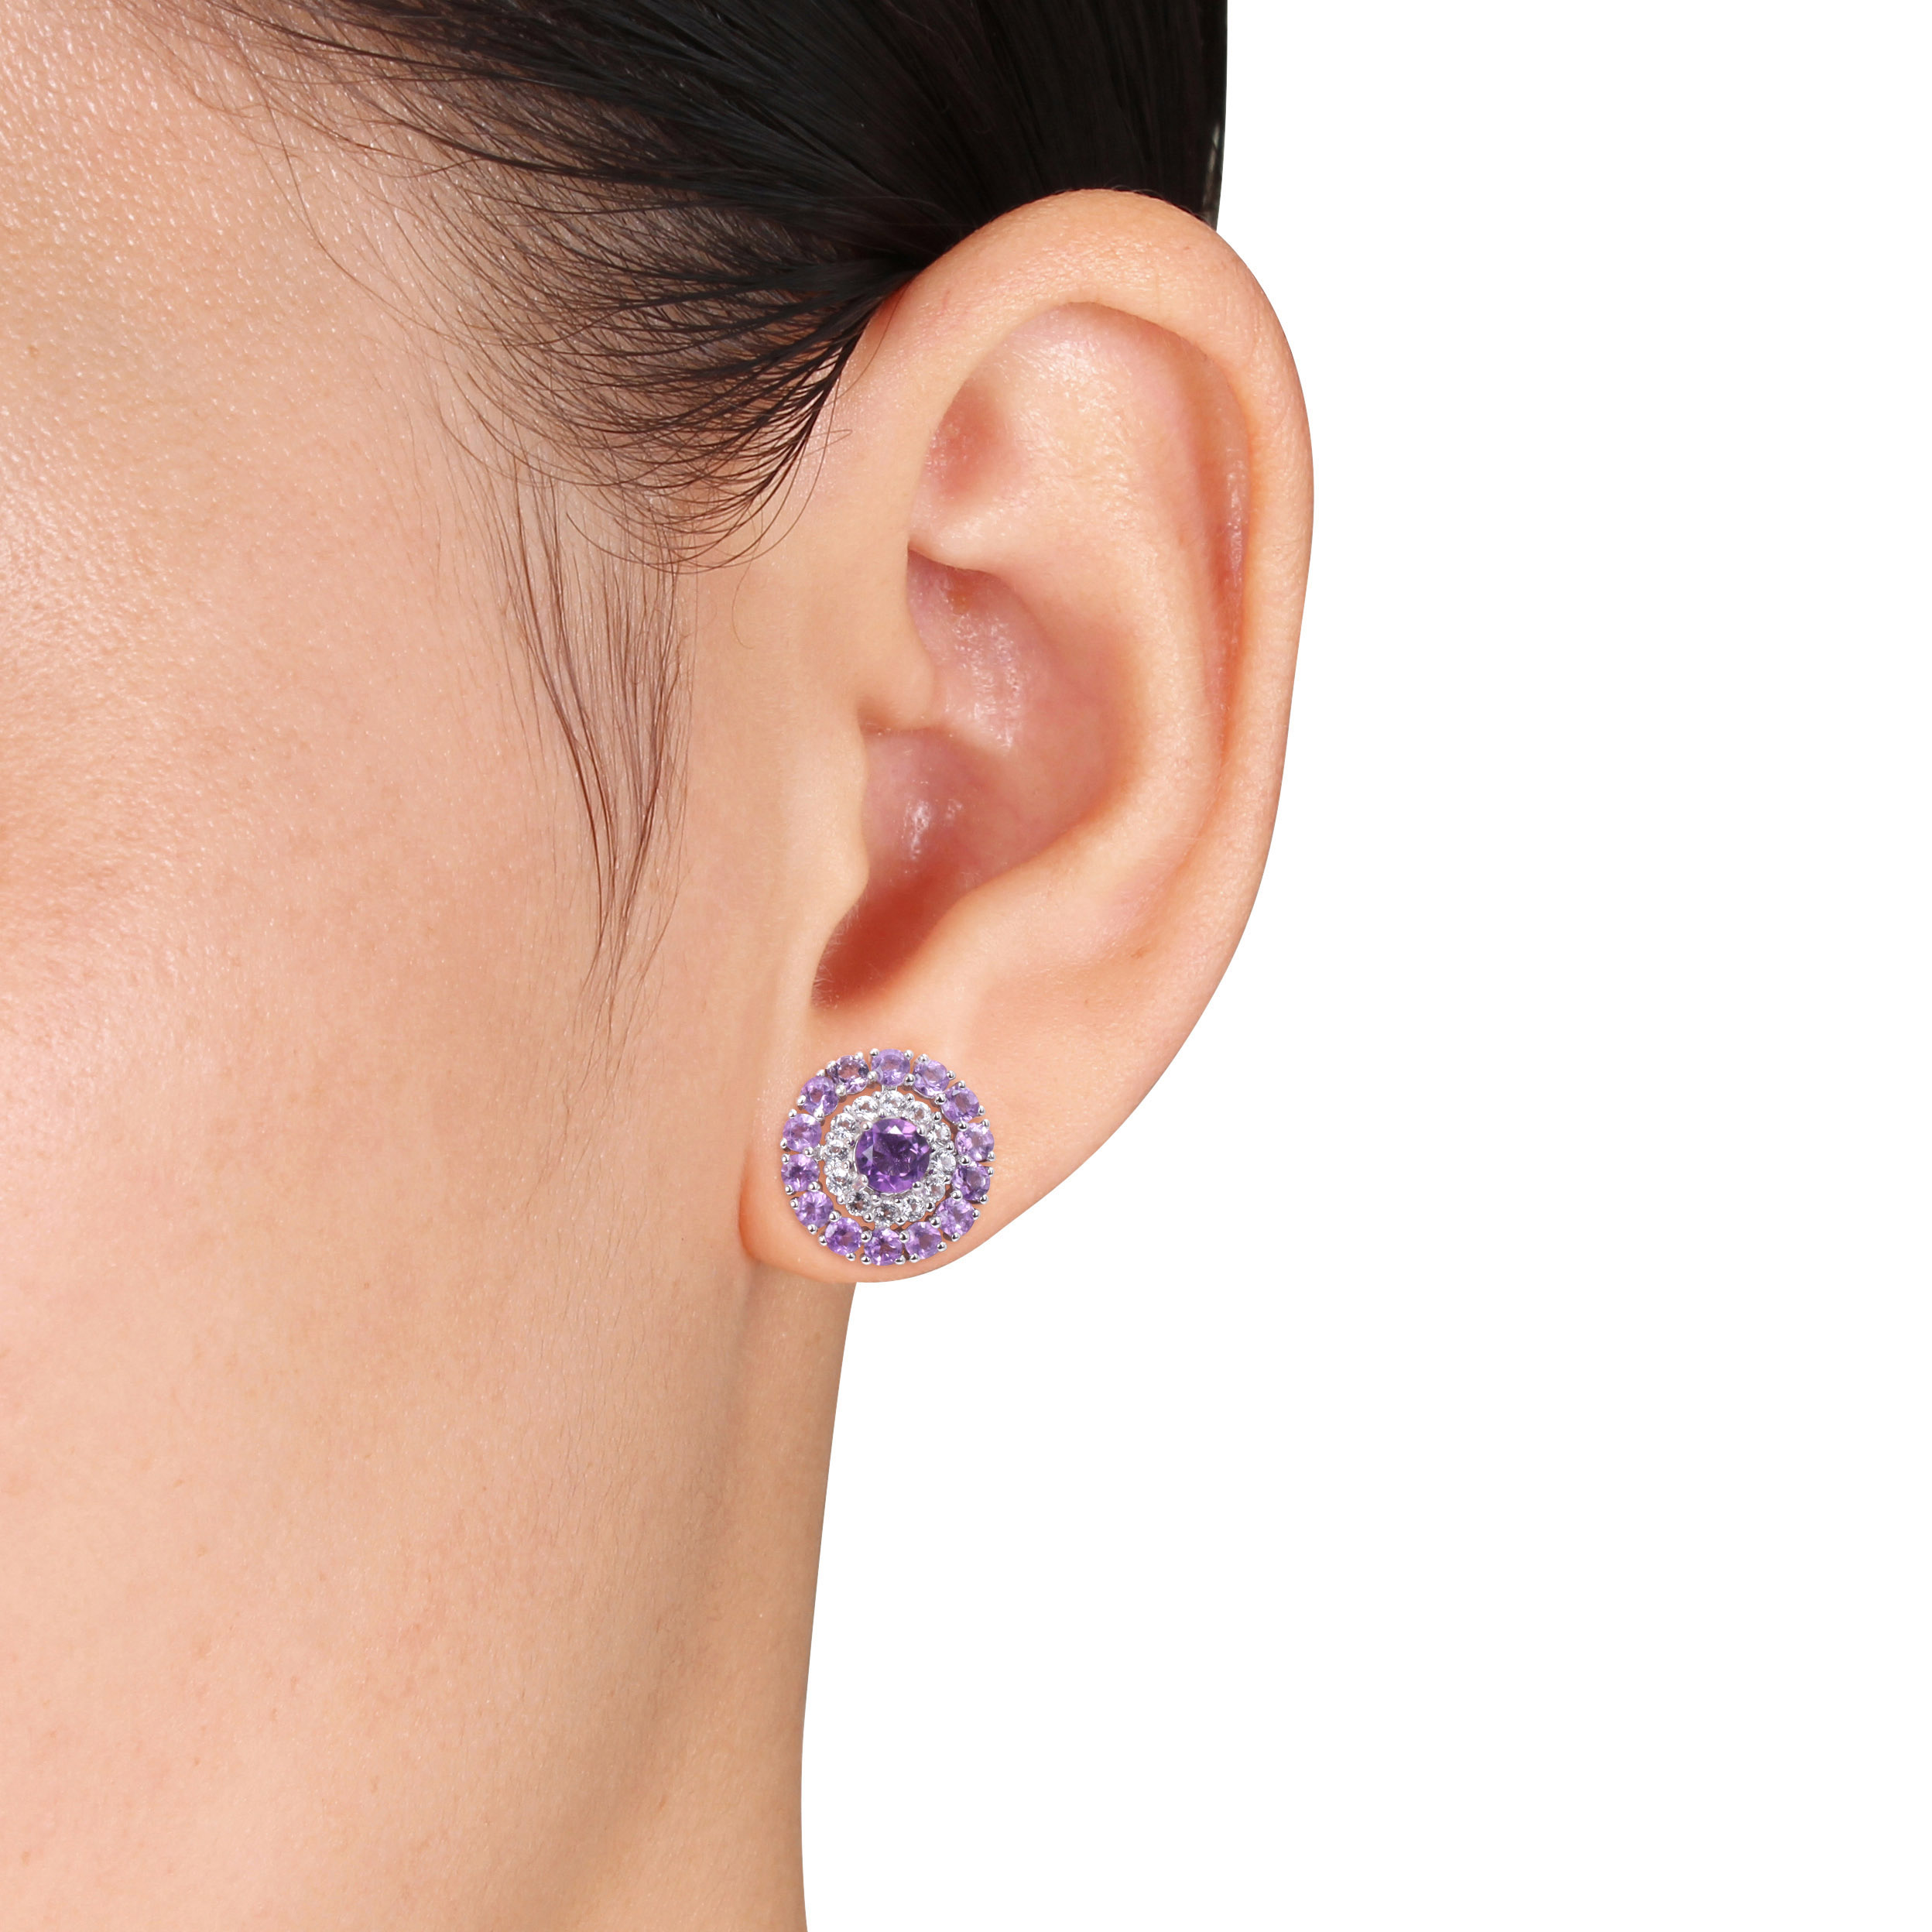 3 1/2 CT TGW Amethyst, African Amethyst and White Topaz Double Halo Stud Earrings in Sterling Silver